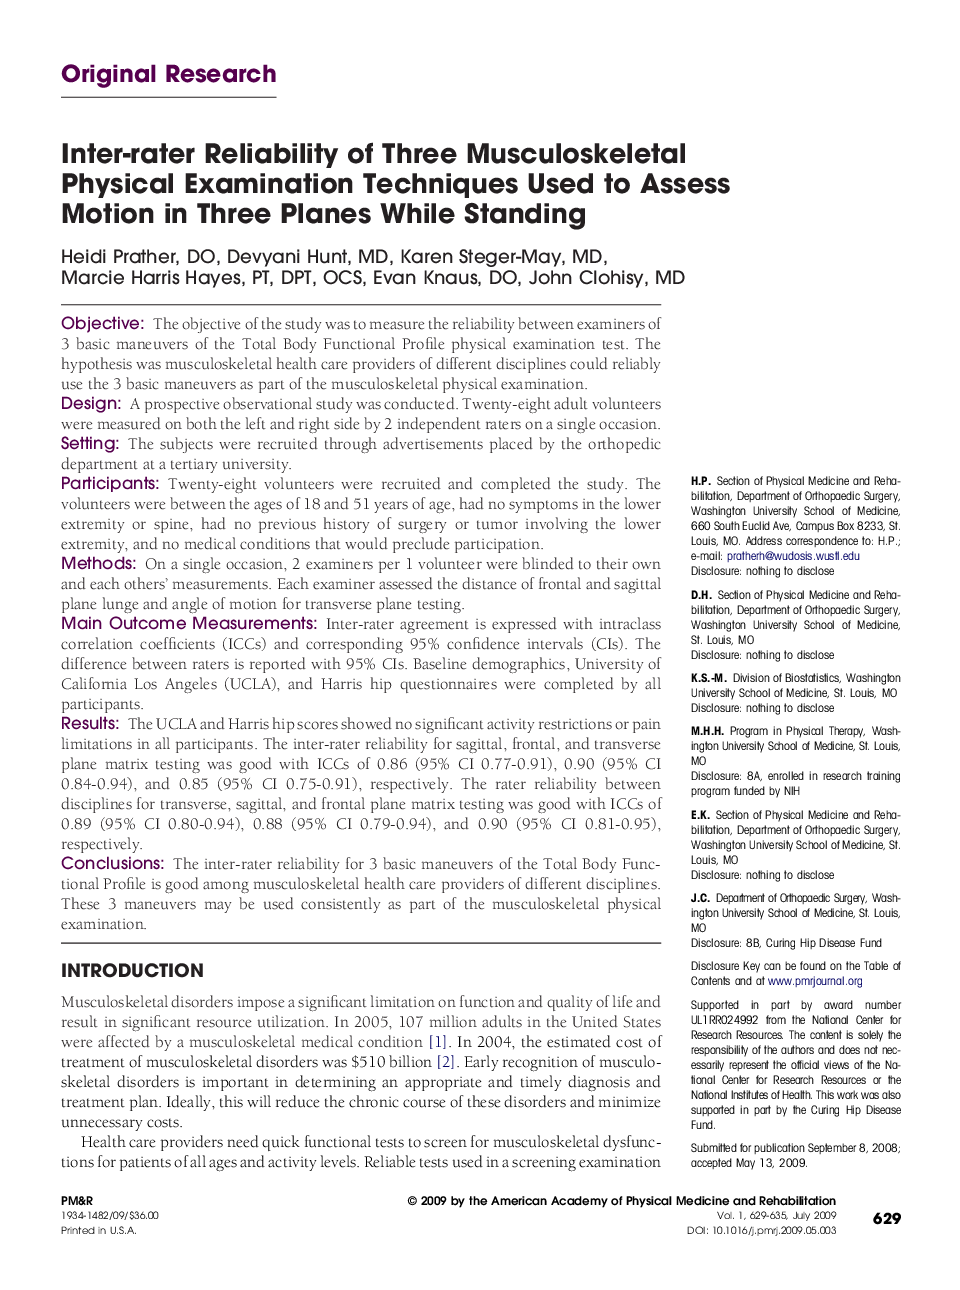 Inter-rater Reliability of Three Musculoskeletal Physical Examination Techniques Used to Assess Motion in Three Planes While Standing 